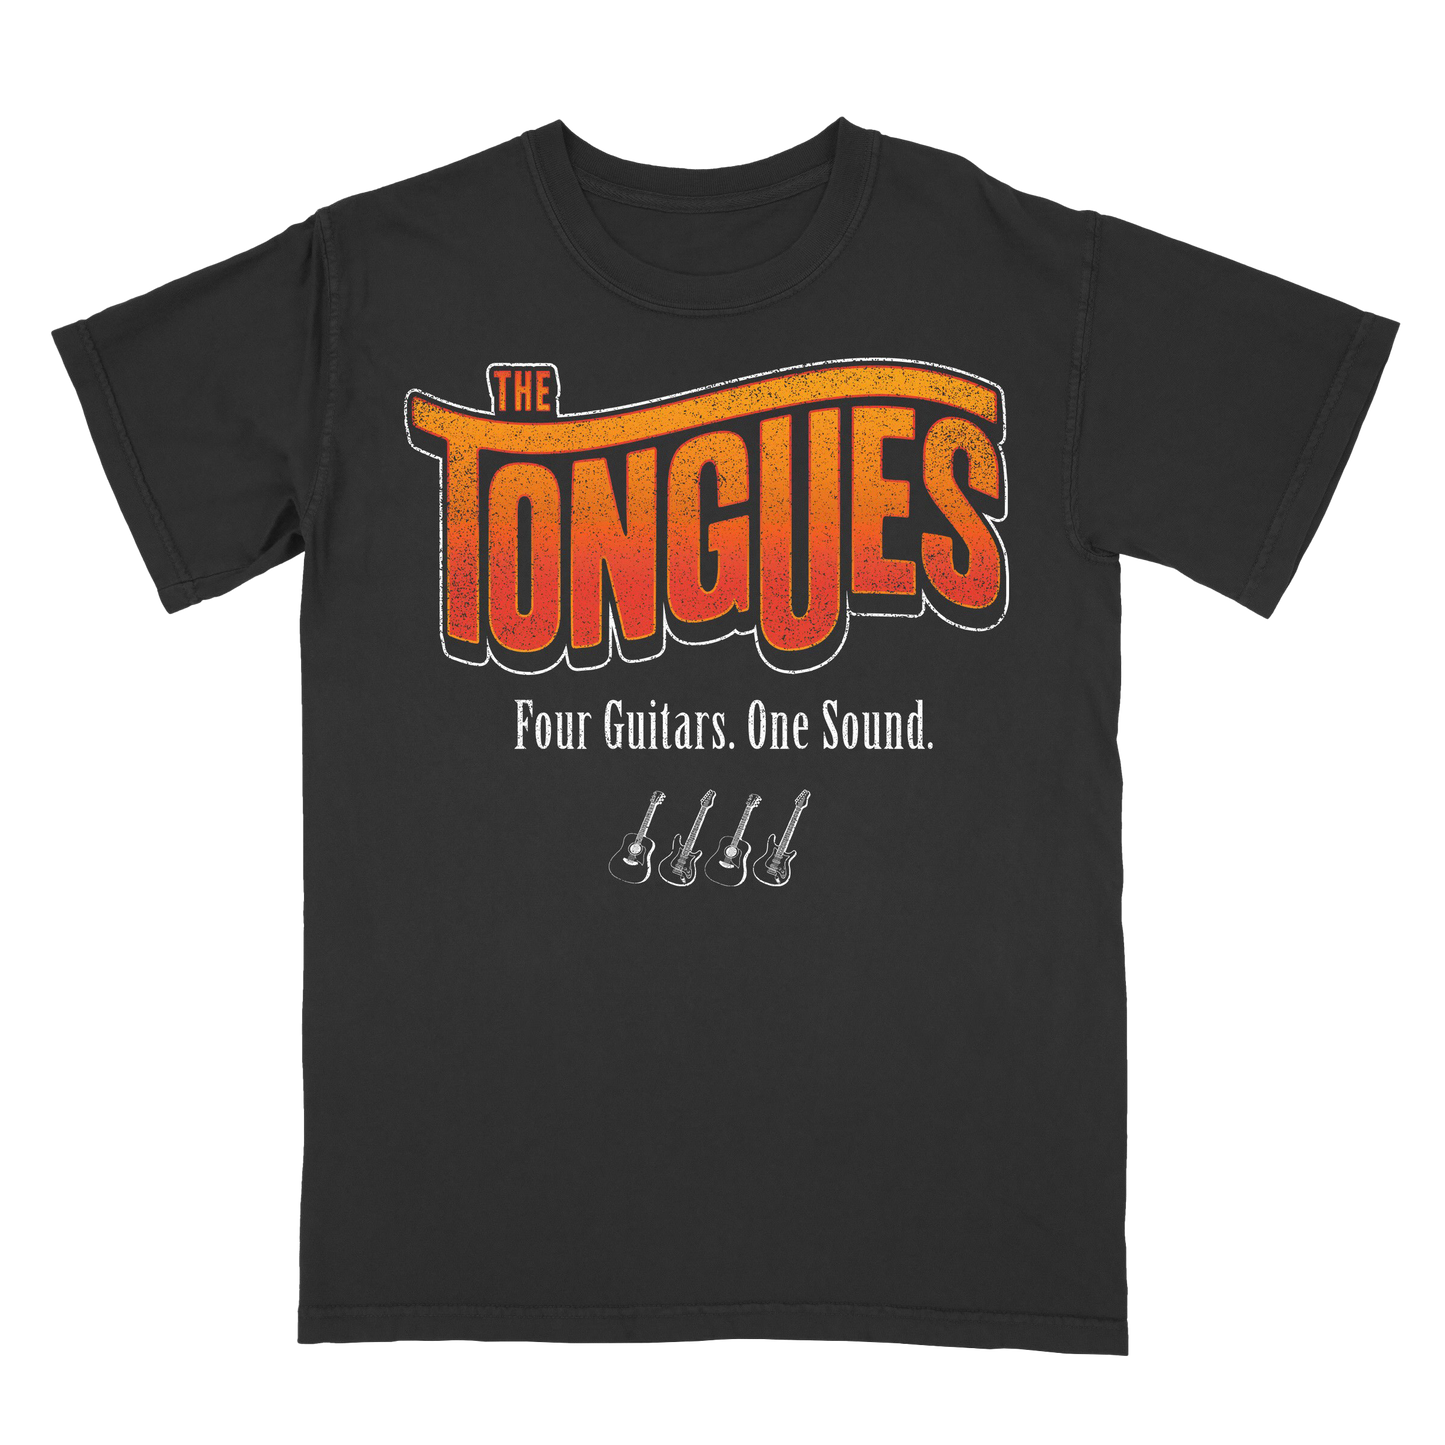 THE OFFICIAL TONGUES TOUR SHIRT